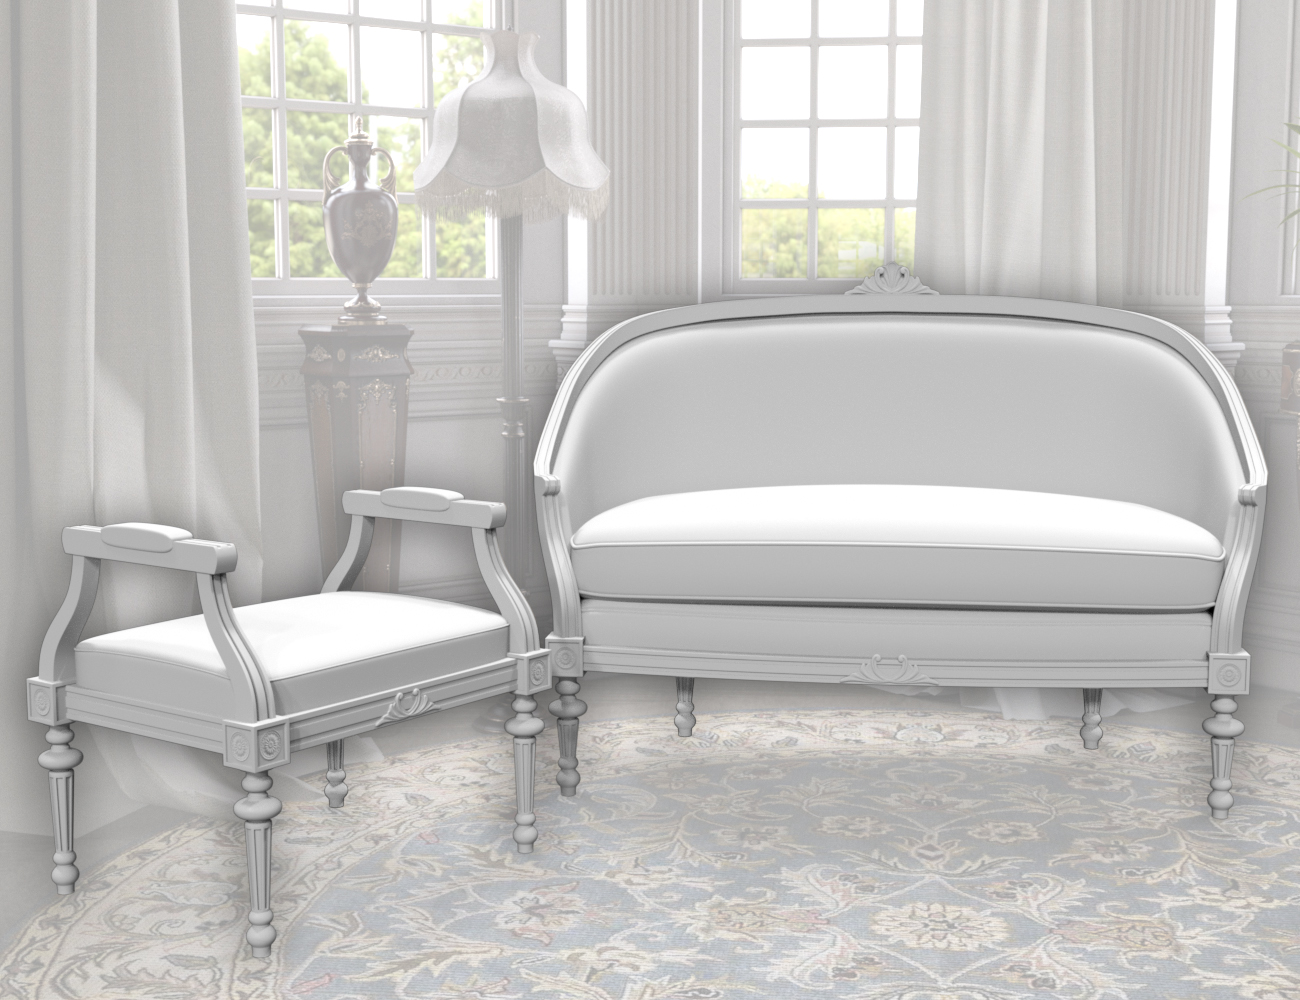 Vintage Furniture Iray by: LaurieS, 3D Models by Daz 3D